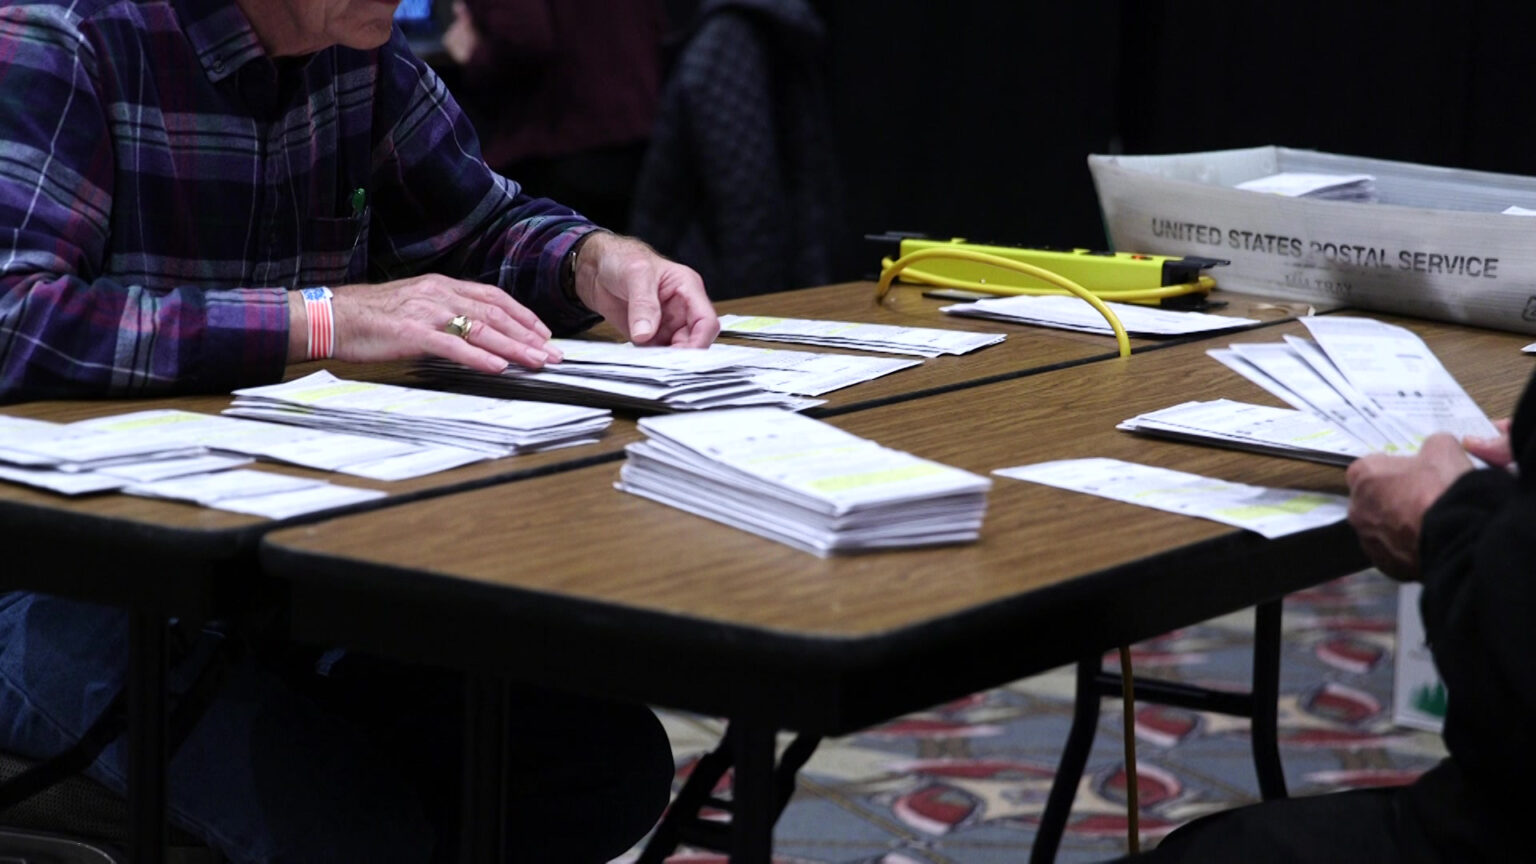 Two poll workers sitting on opposite sides of two folding tables with laminate wood surfaces placed side-by-side handle absentee ballots, with multiple stacks of ballots atop the table alongside a empty plastic U.S. mail trays.